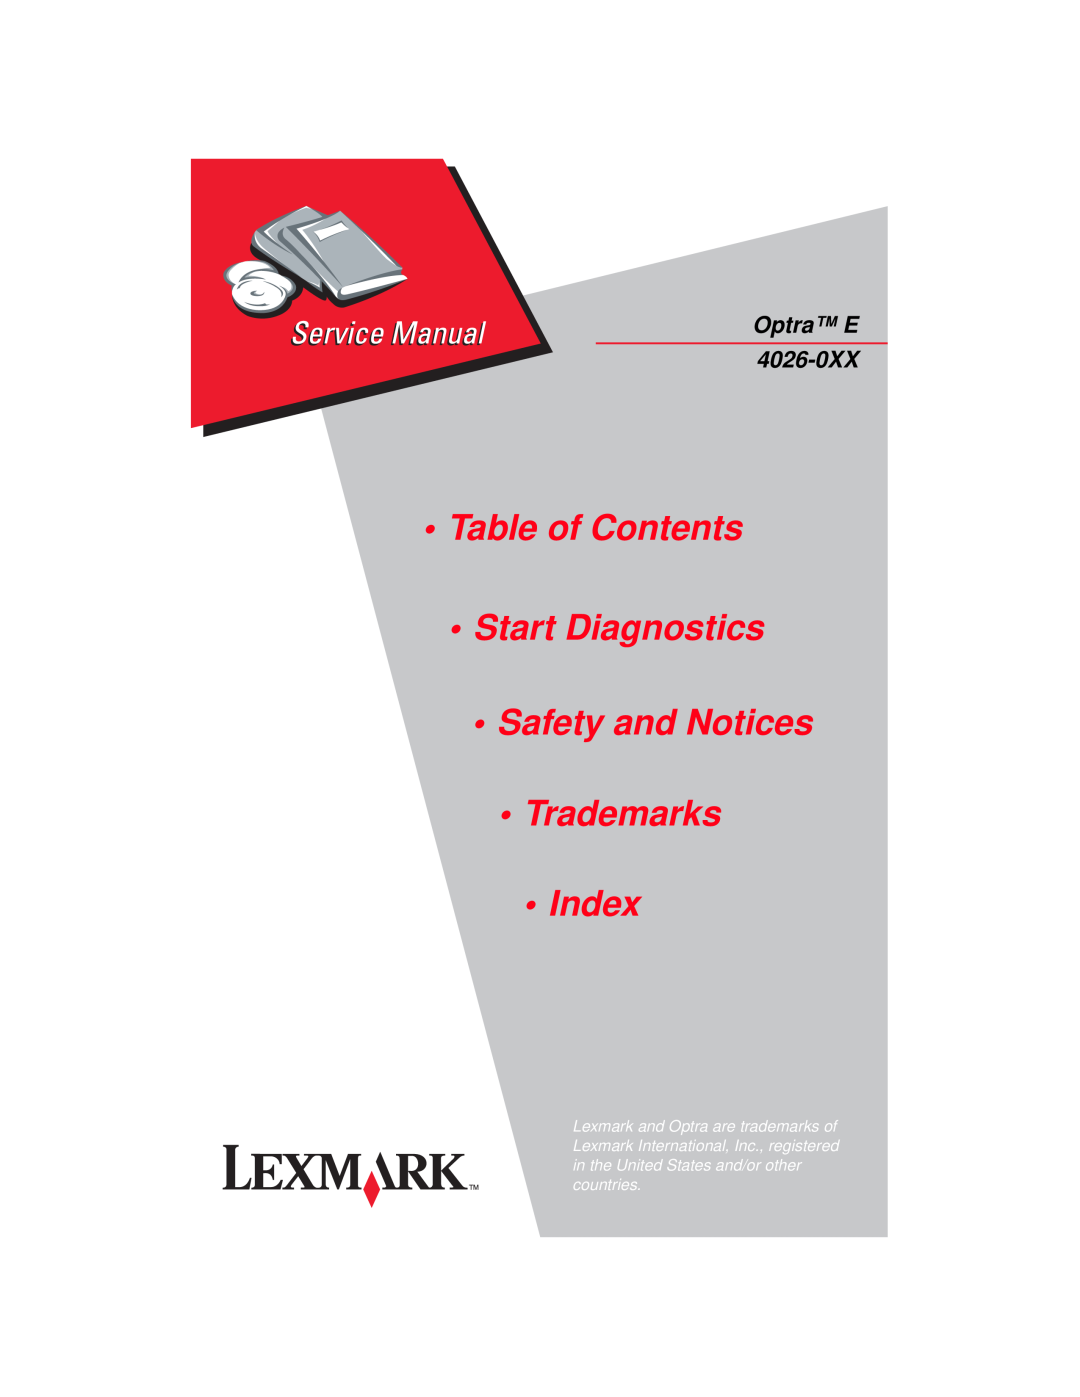 Lexmark OptraTM manual •Table of Contents •Start Diagnostics, •Safety and Notices •Trademarks • Index, Optra E 4026-0XX 